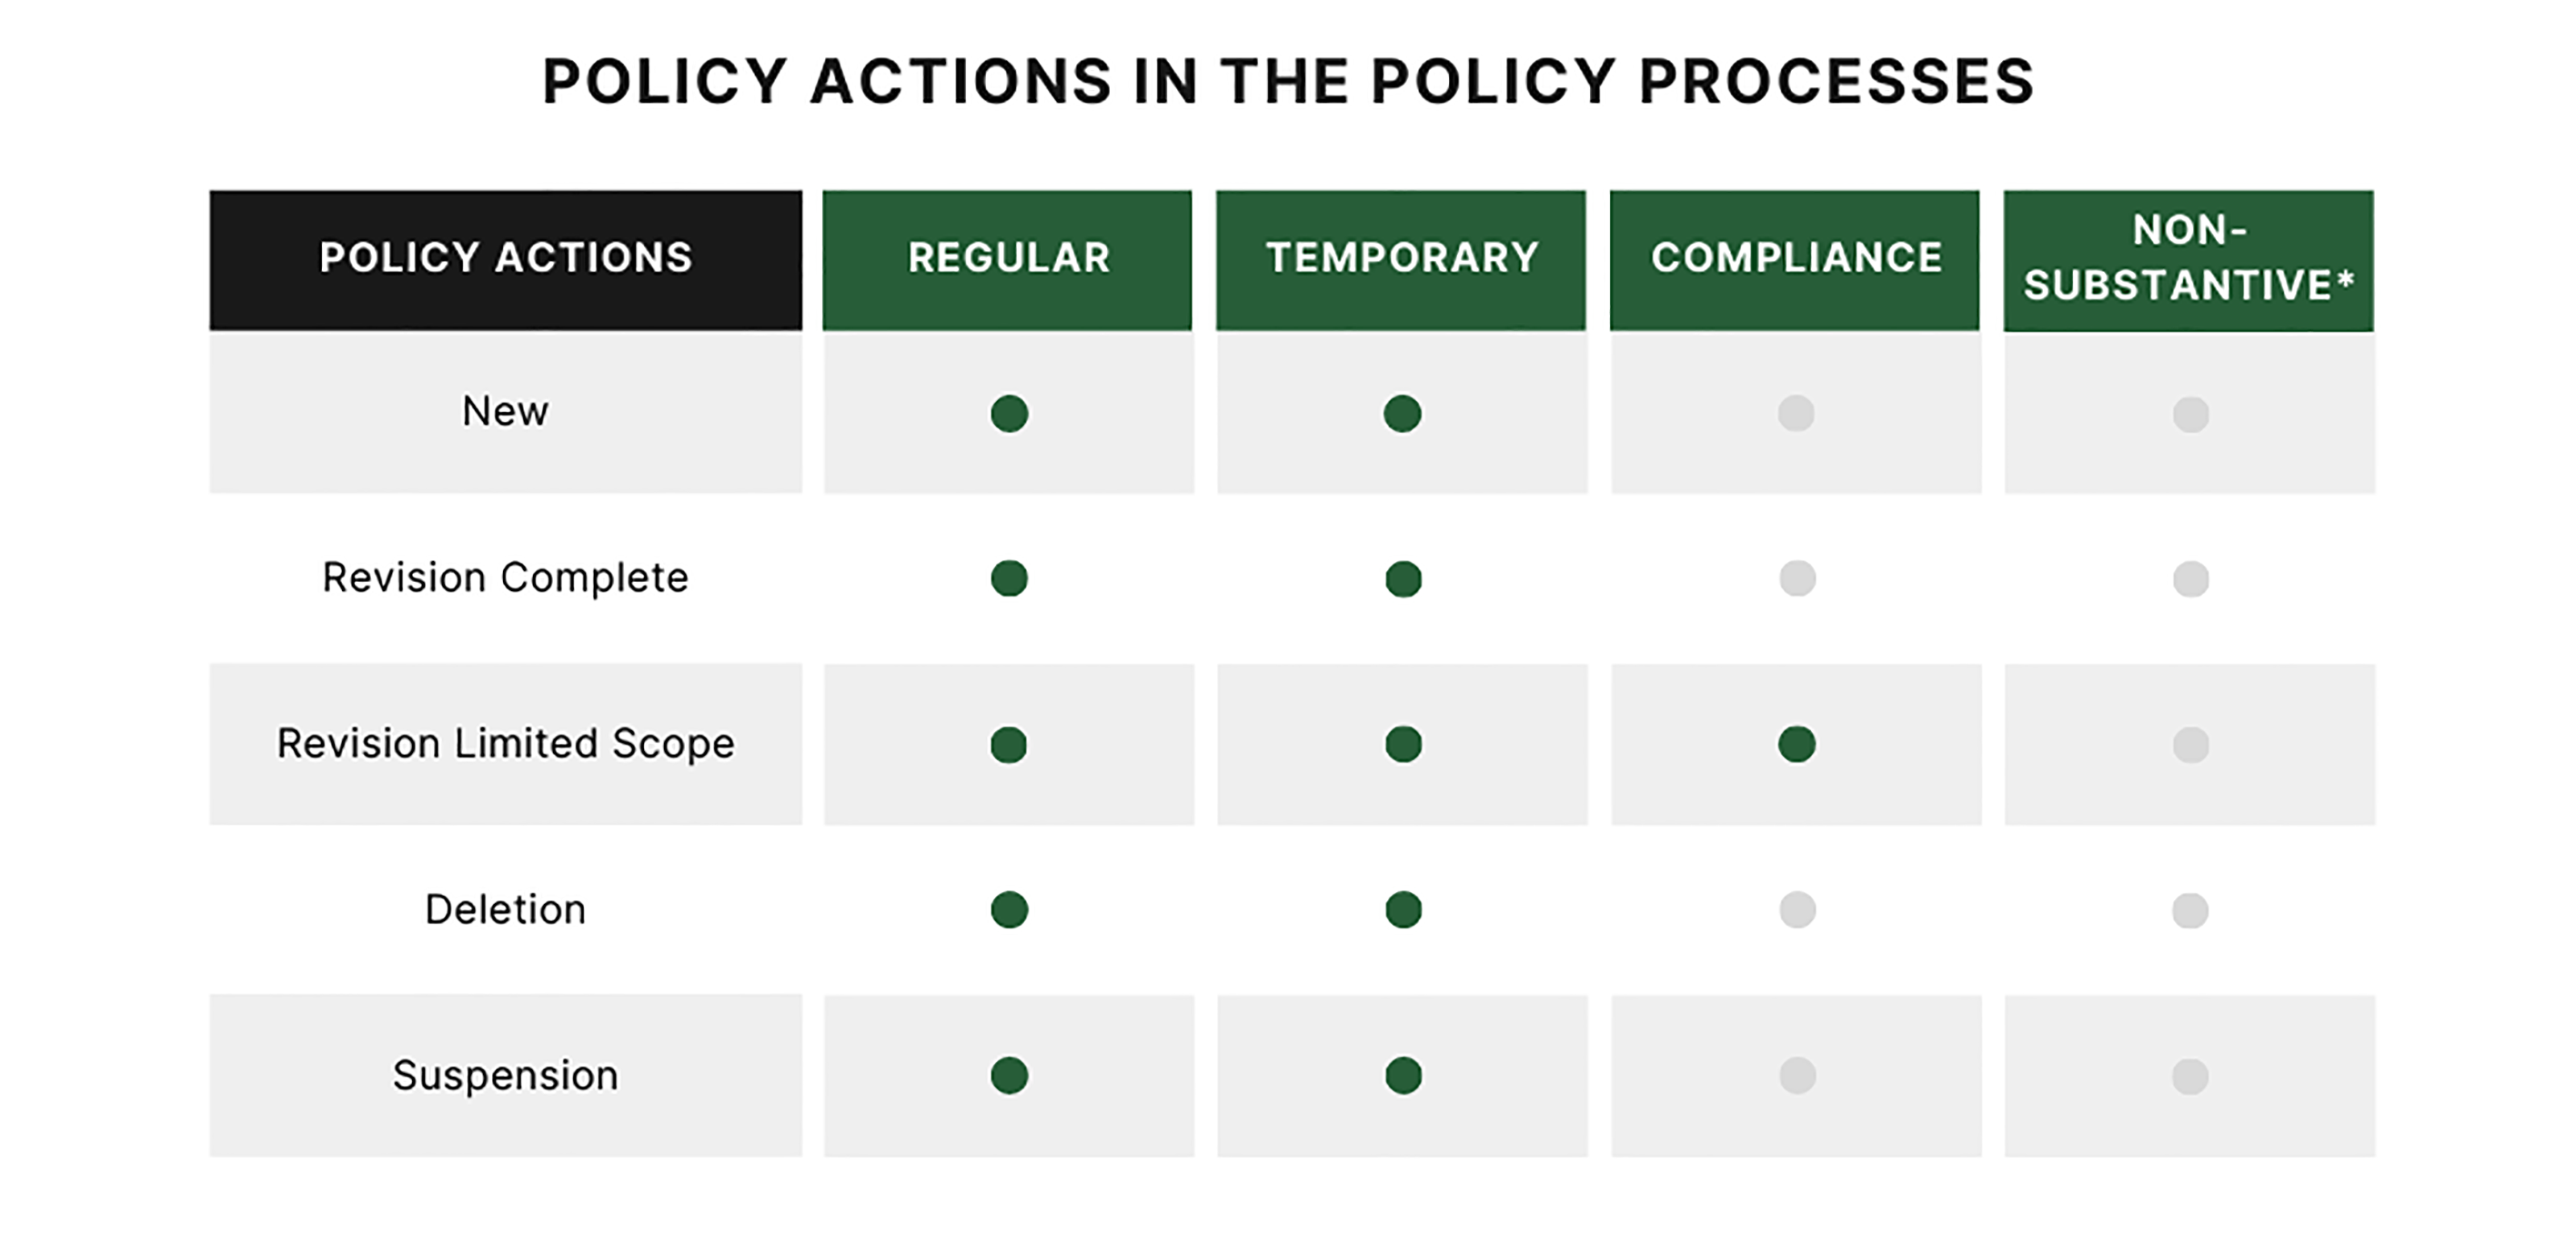 A chart explaining which policy actions (new, revision, limited scope, deletion, and suspension) can be done in which policy processes (regular, temporary, compliance, and non-substantive)